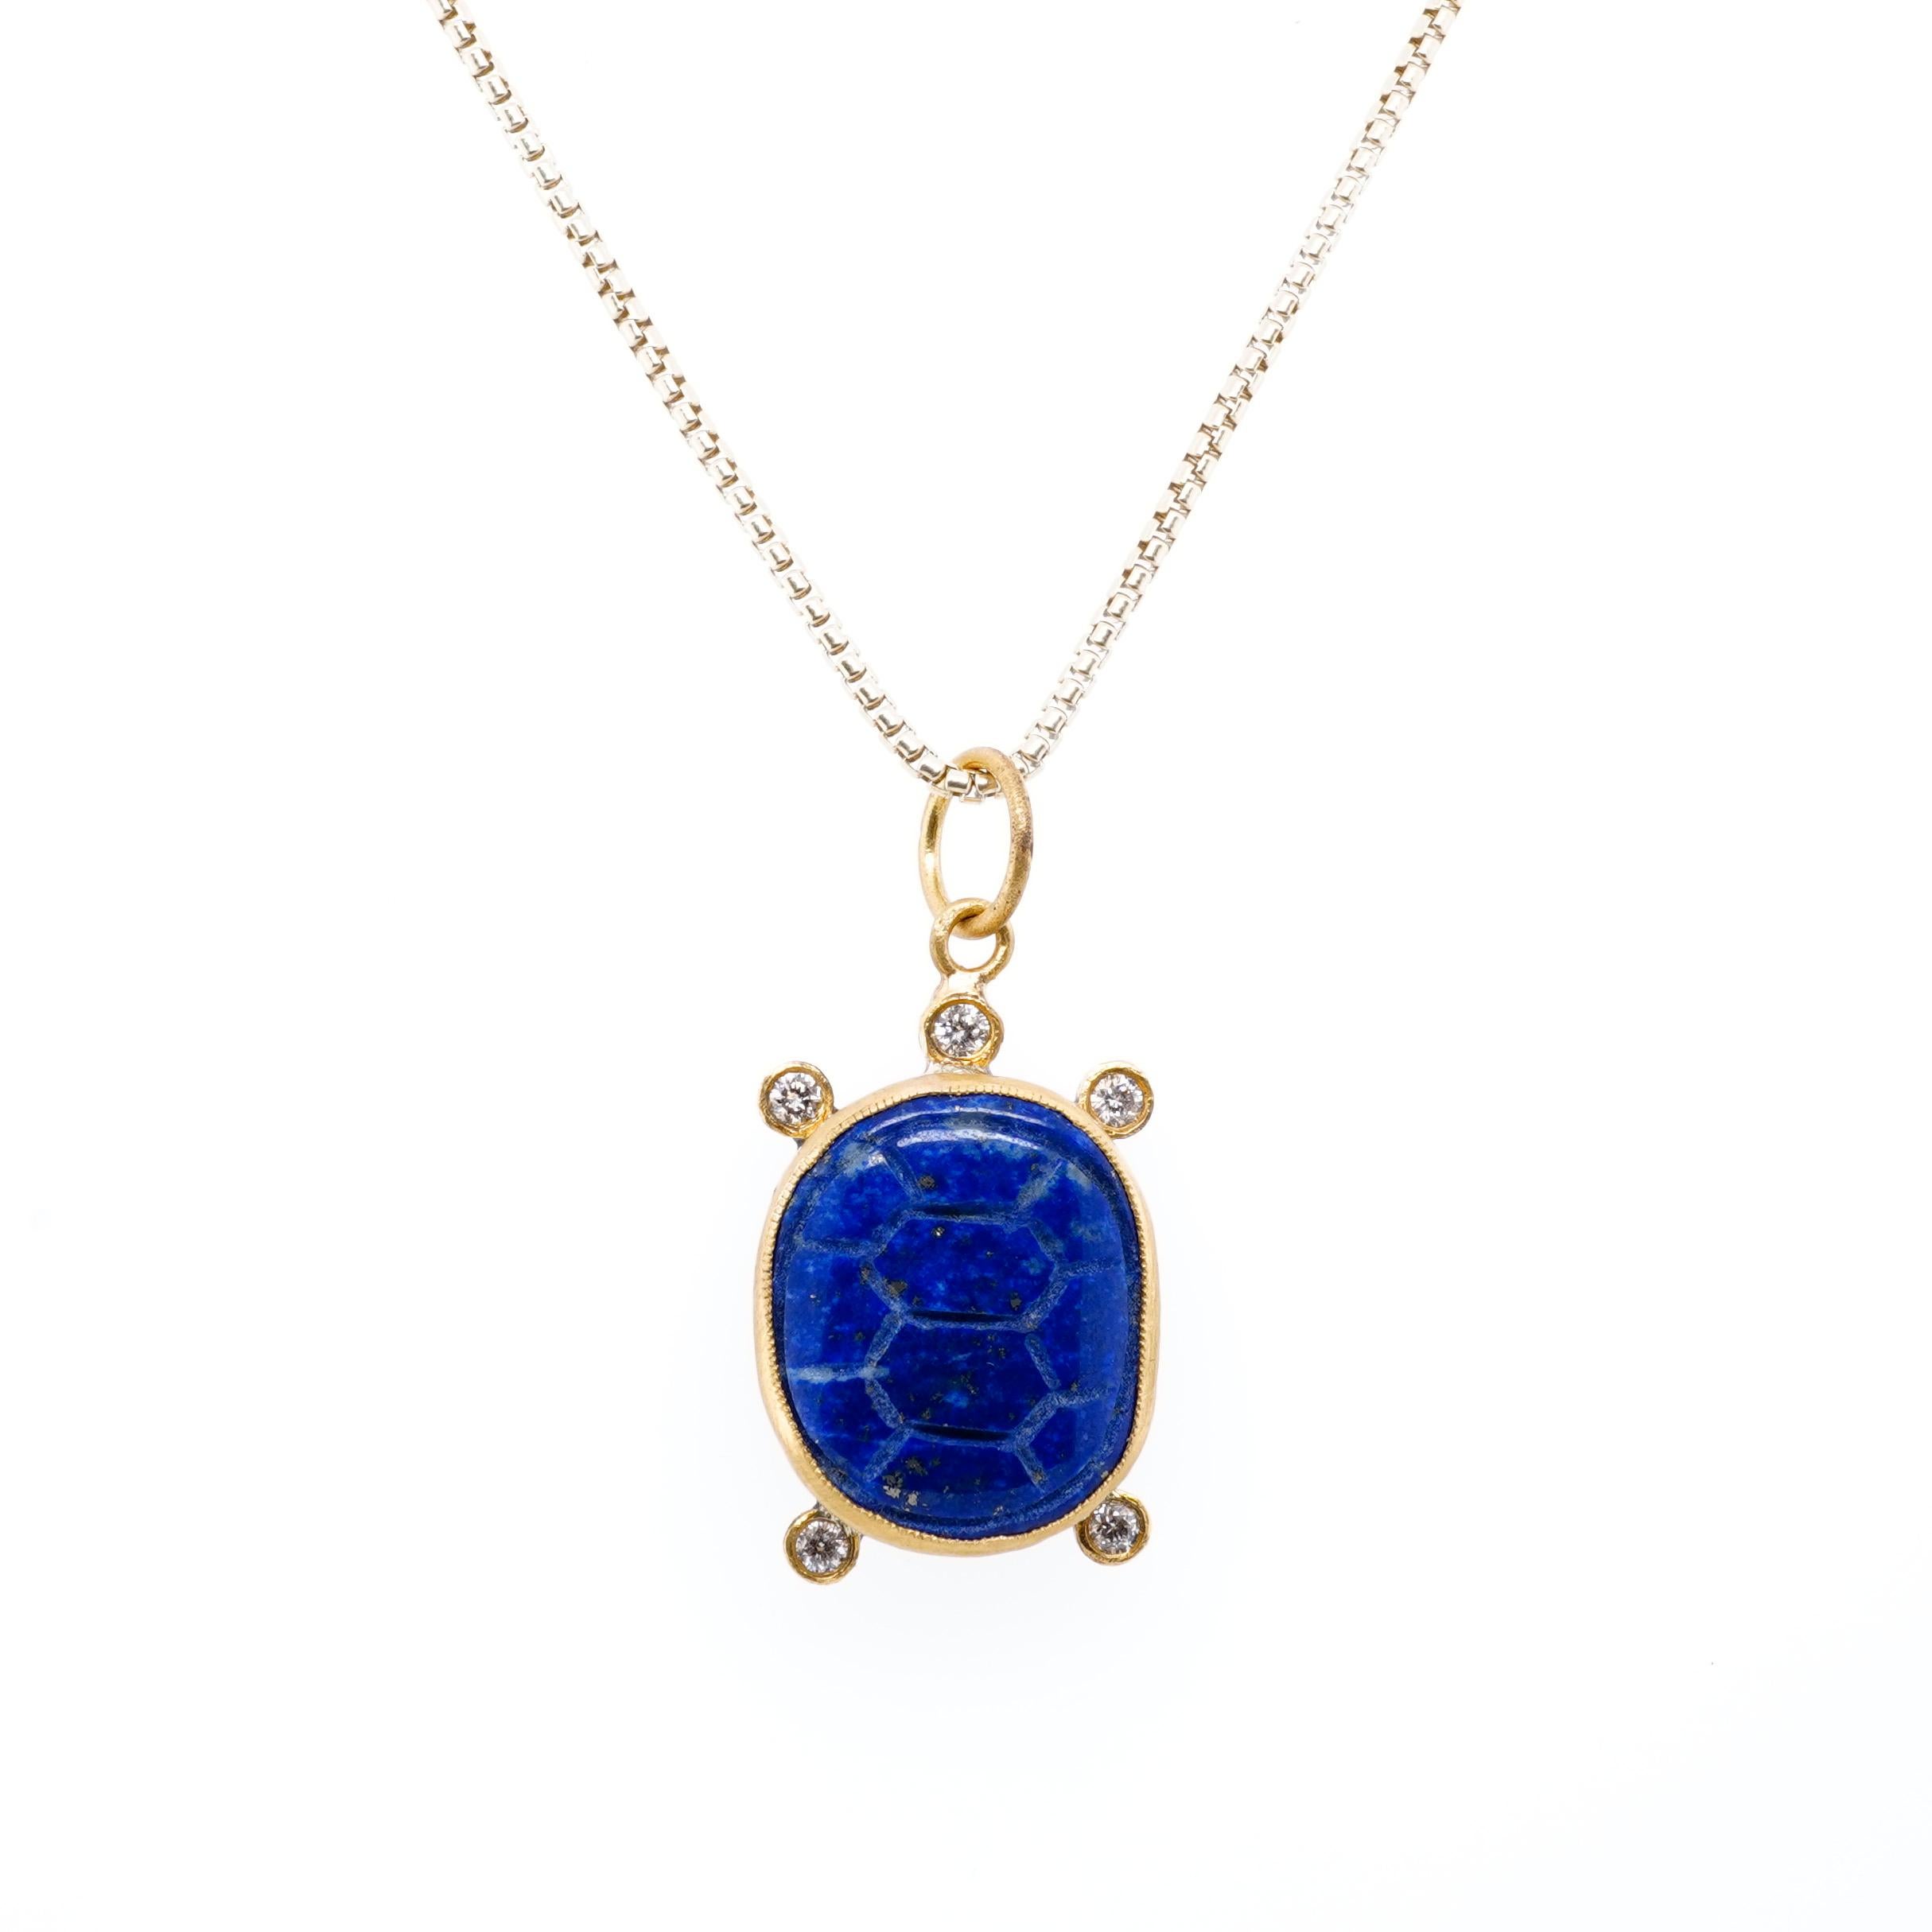 Carved Lapis Turtle Charm Amulet Pendant Necklace with Diamonds, 24kt Gold and Silver by Prehistoric Works of Istanbul, Turkey. Lapis - 10.90cts, Diamonds - 0.011cts. These pendants pair well alone or with other coin pendants or with miniature